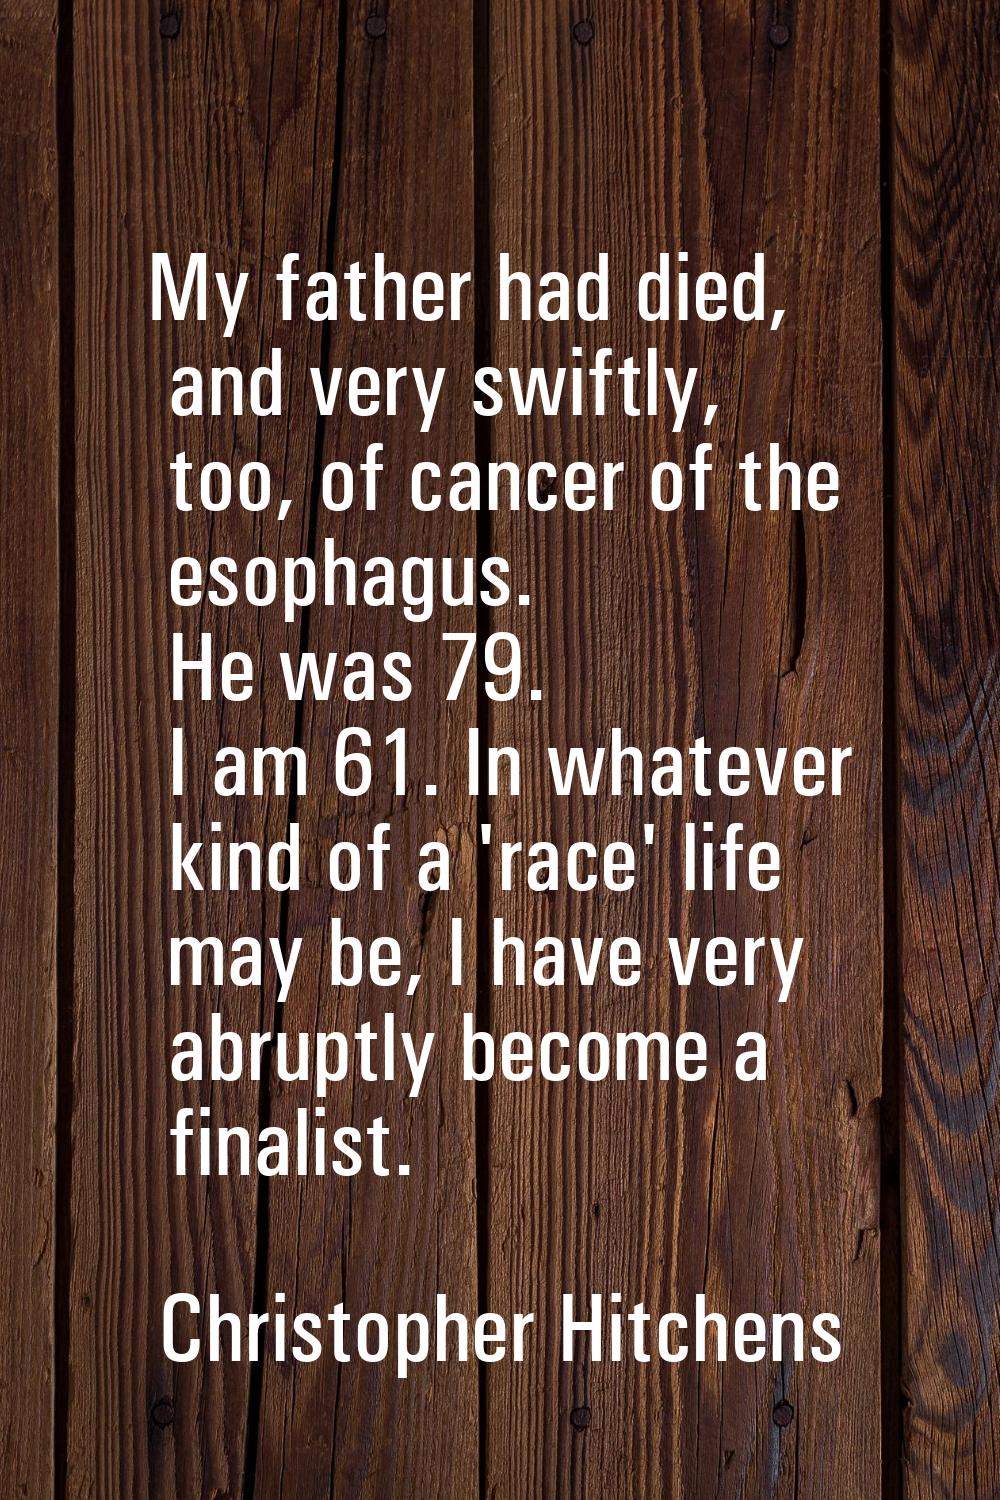 My father had died, and very swiftly, too, of cancer of the esophagus. He was 79. I am 61. In whate